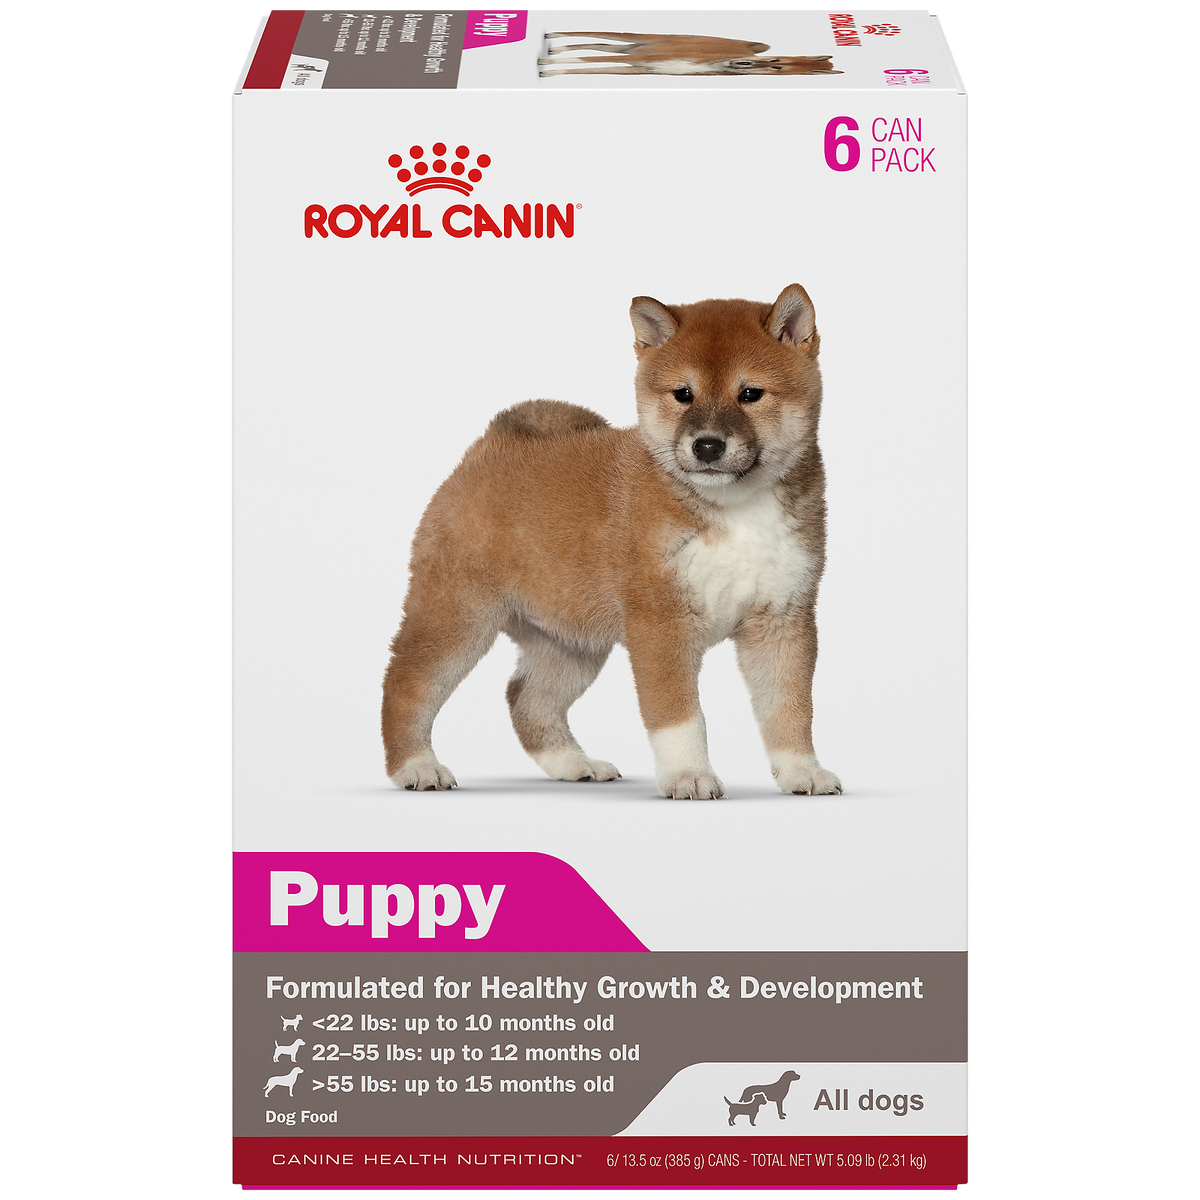 Royal Canin® Canine Health Nutrition™ Puppy Canned Dog Food, 13.5 oz, 6-Pack